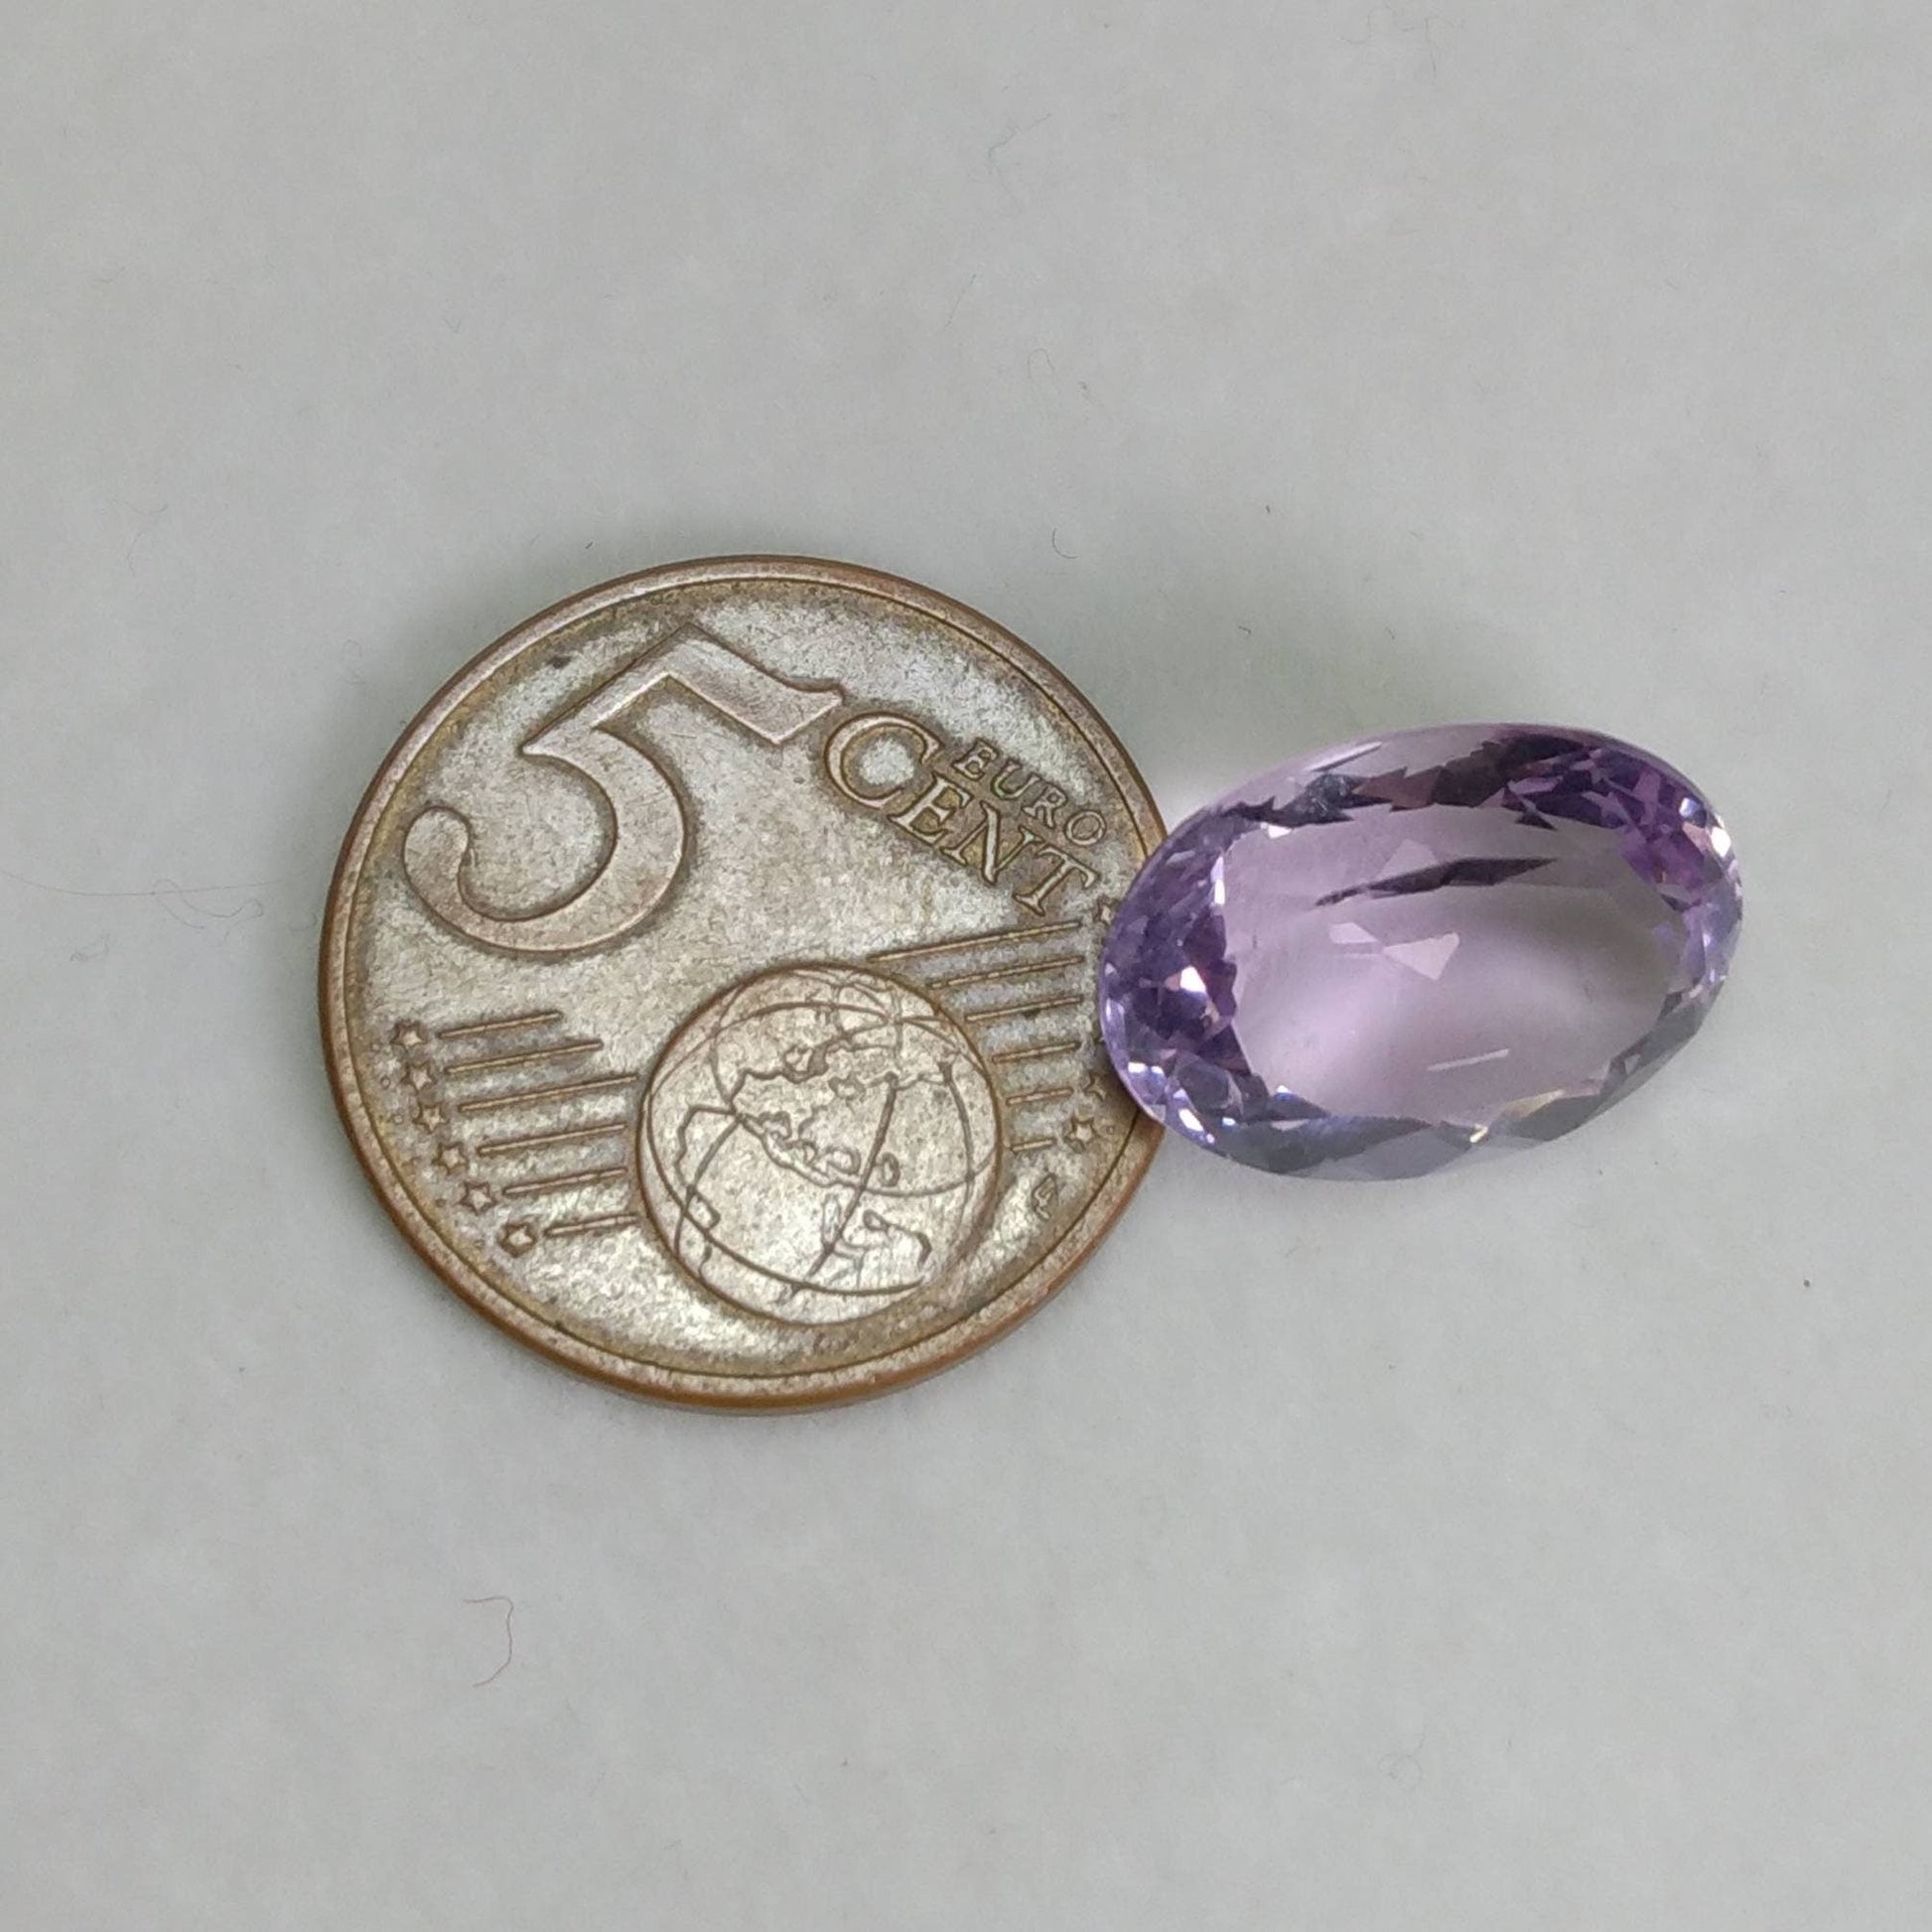 ARSAA GEMS AND MINERALSNatural fine quality beautiful 9.5 carats VV clarity faceted oval shape amethyst gem - Premium  from ARSAA GEMS AND MINERALS - Just $18.00! Shop now at ARSAA GEMS AND MINERALS